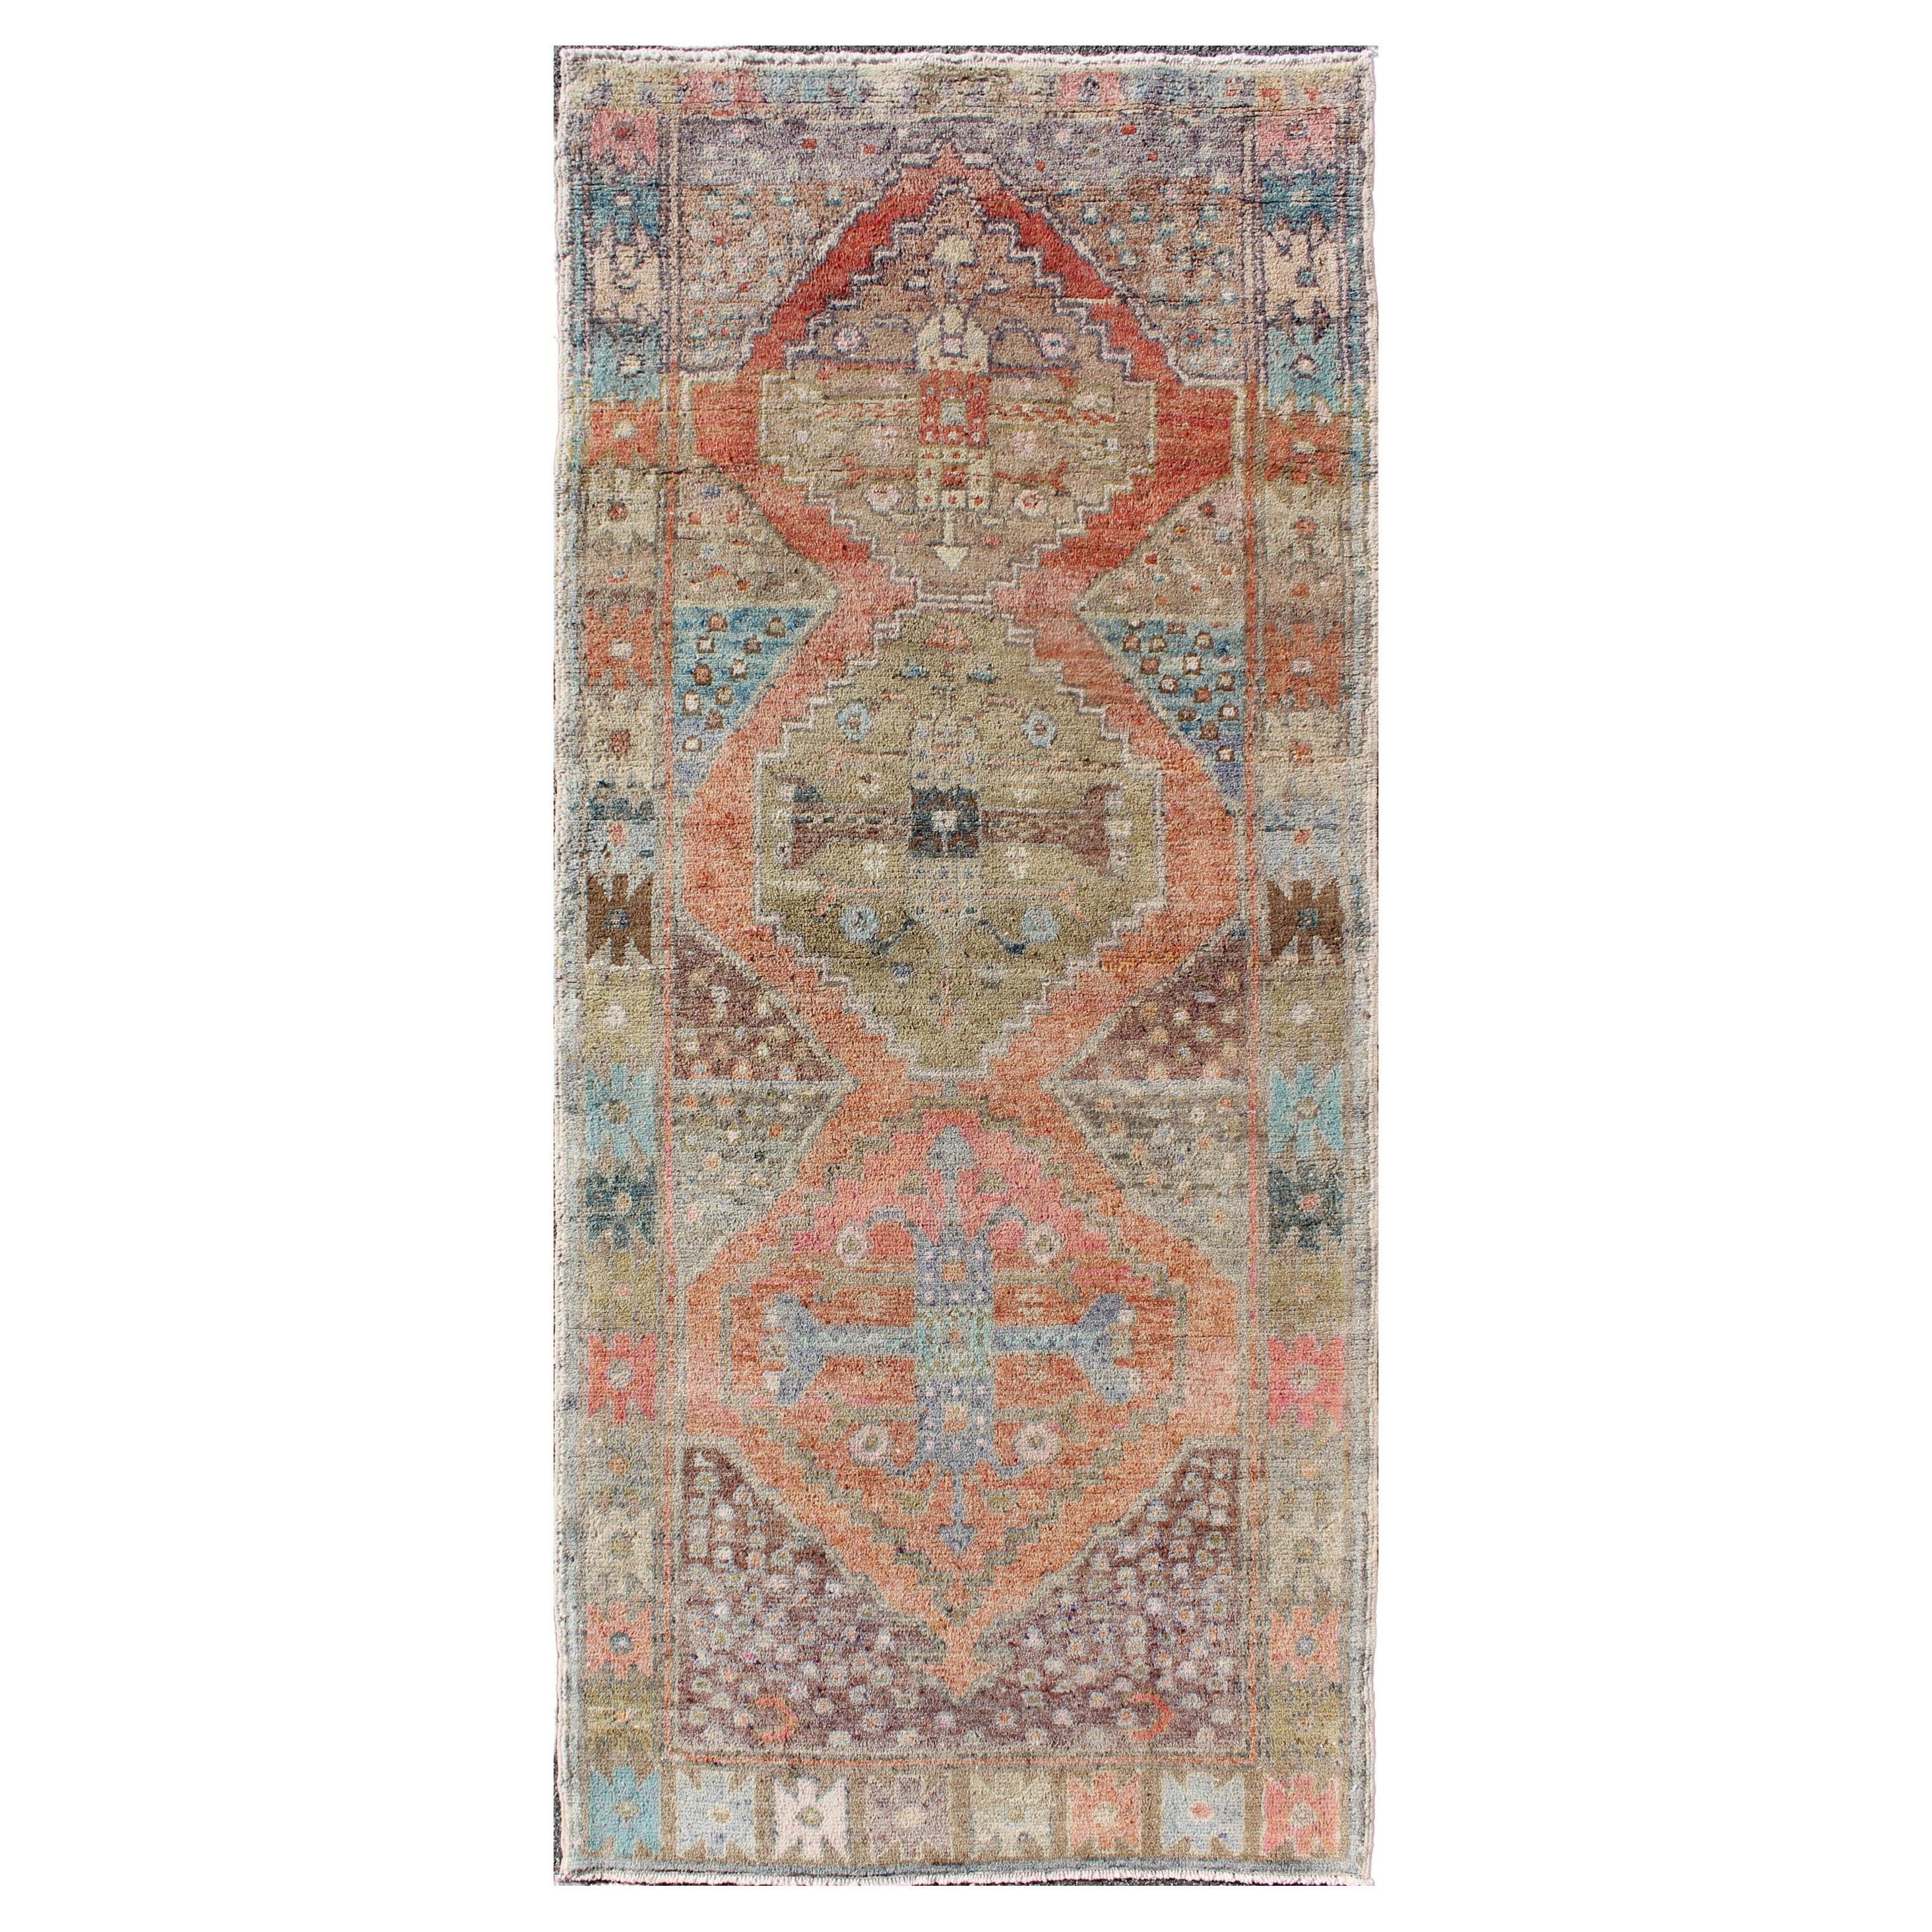 Antique Turkish Oushak Runner in Coral, Blue, Brown, Yellow Green & Rust Red For Sale